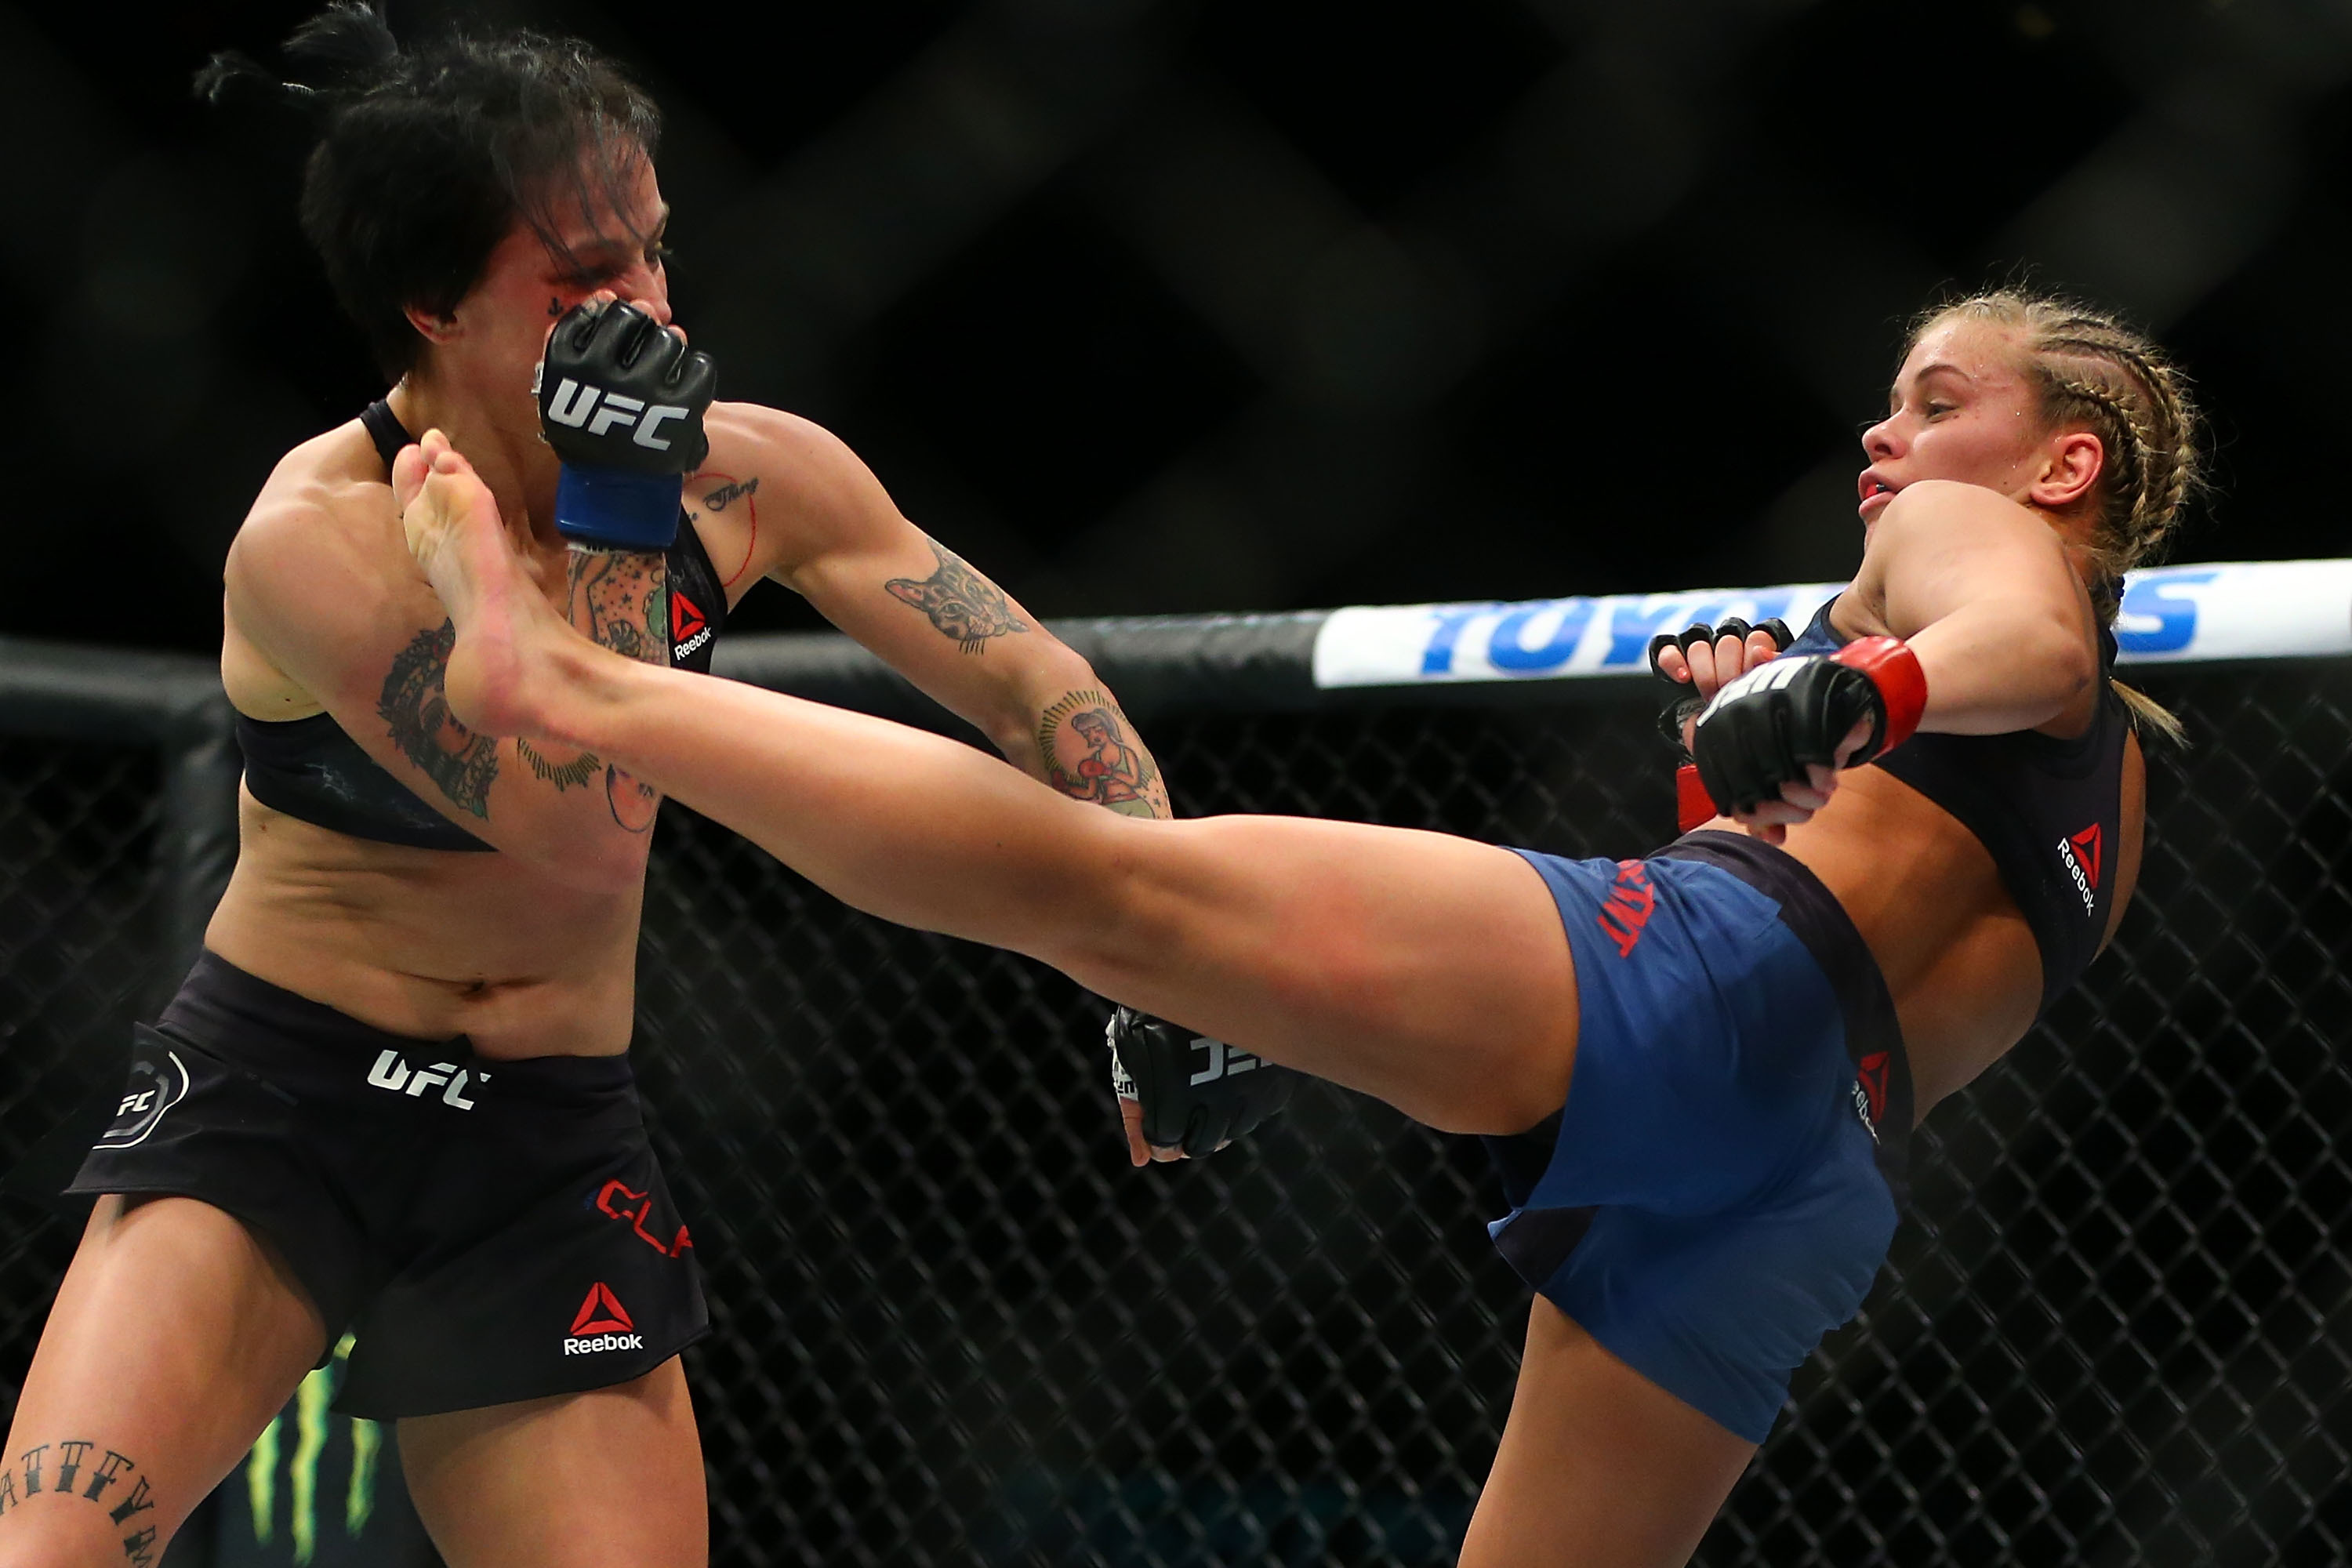 Paige Vanzant Fought With Broken Arm Vows To Return Better And Stronger Bleacher Report Latest News Videos And Highlights